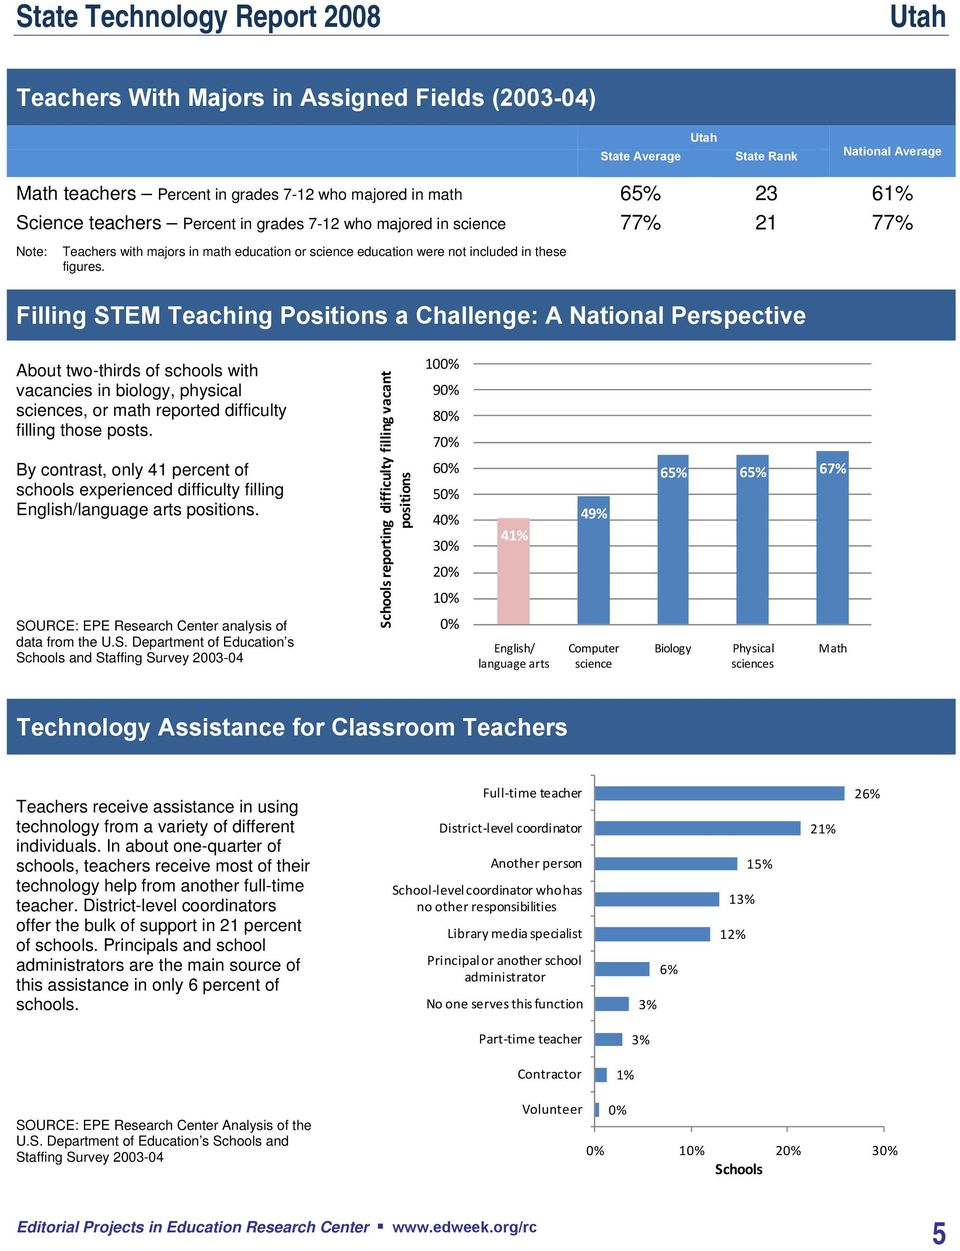 Filling STEM Teaching Positions a Challenge: A National Perspective About two-thirds of schools with vacancies in biology, physical sciences, or math reported difficulty filling those posts.